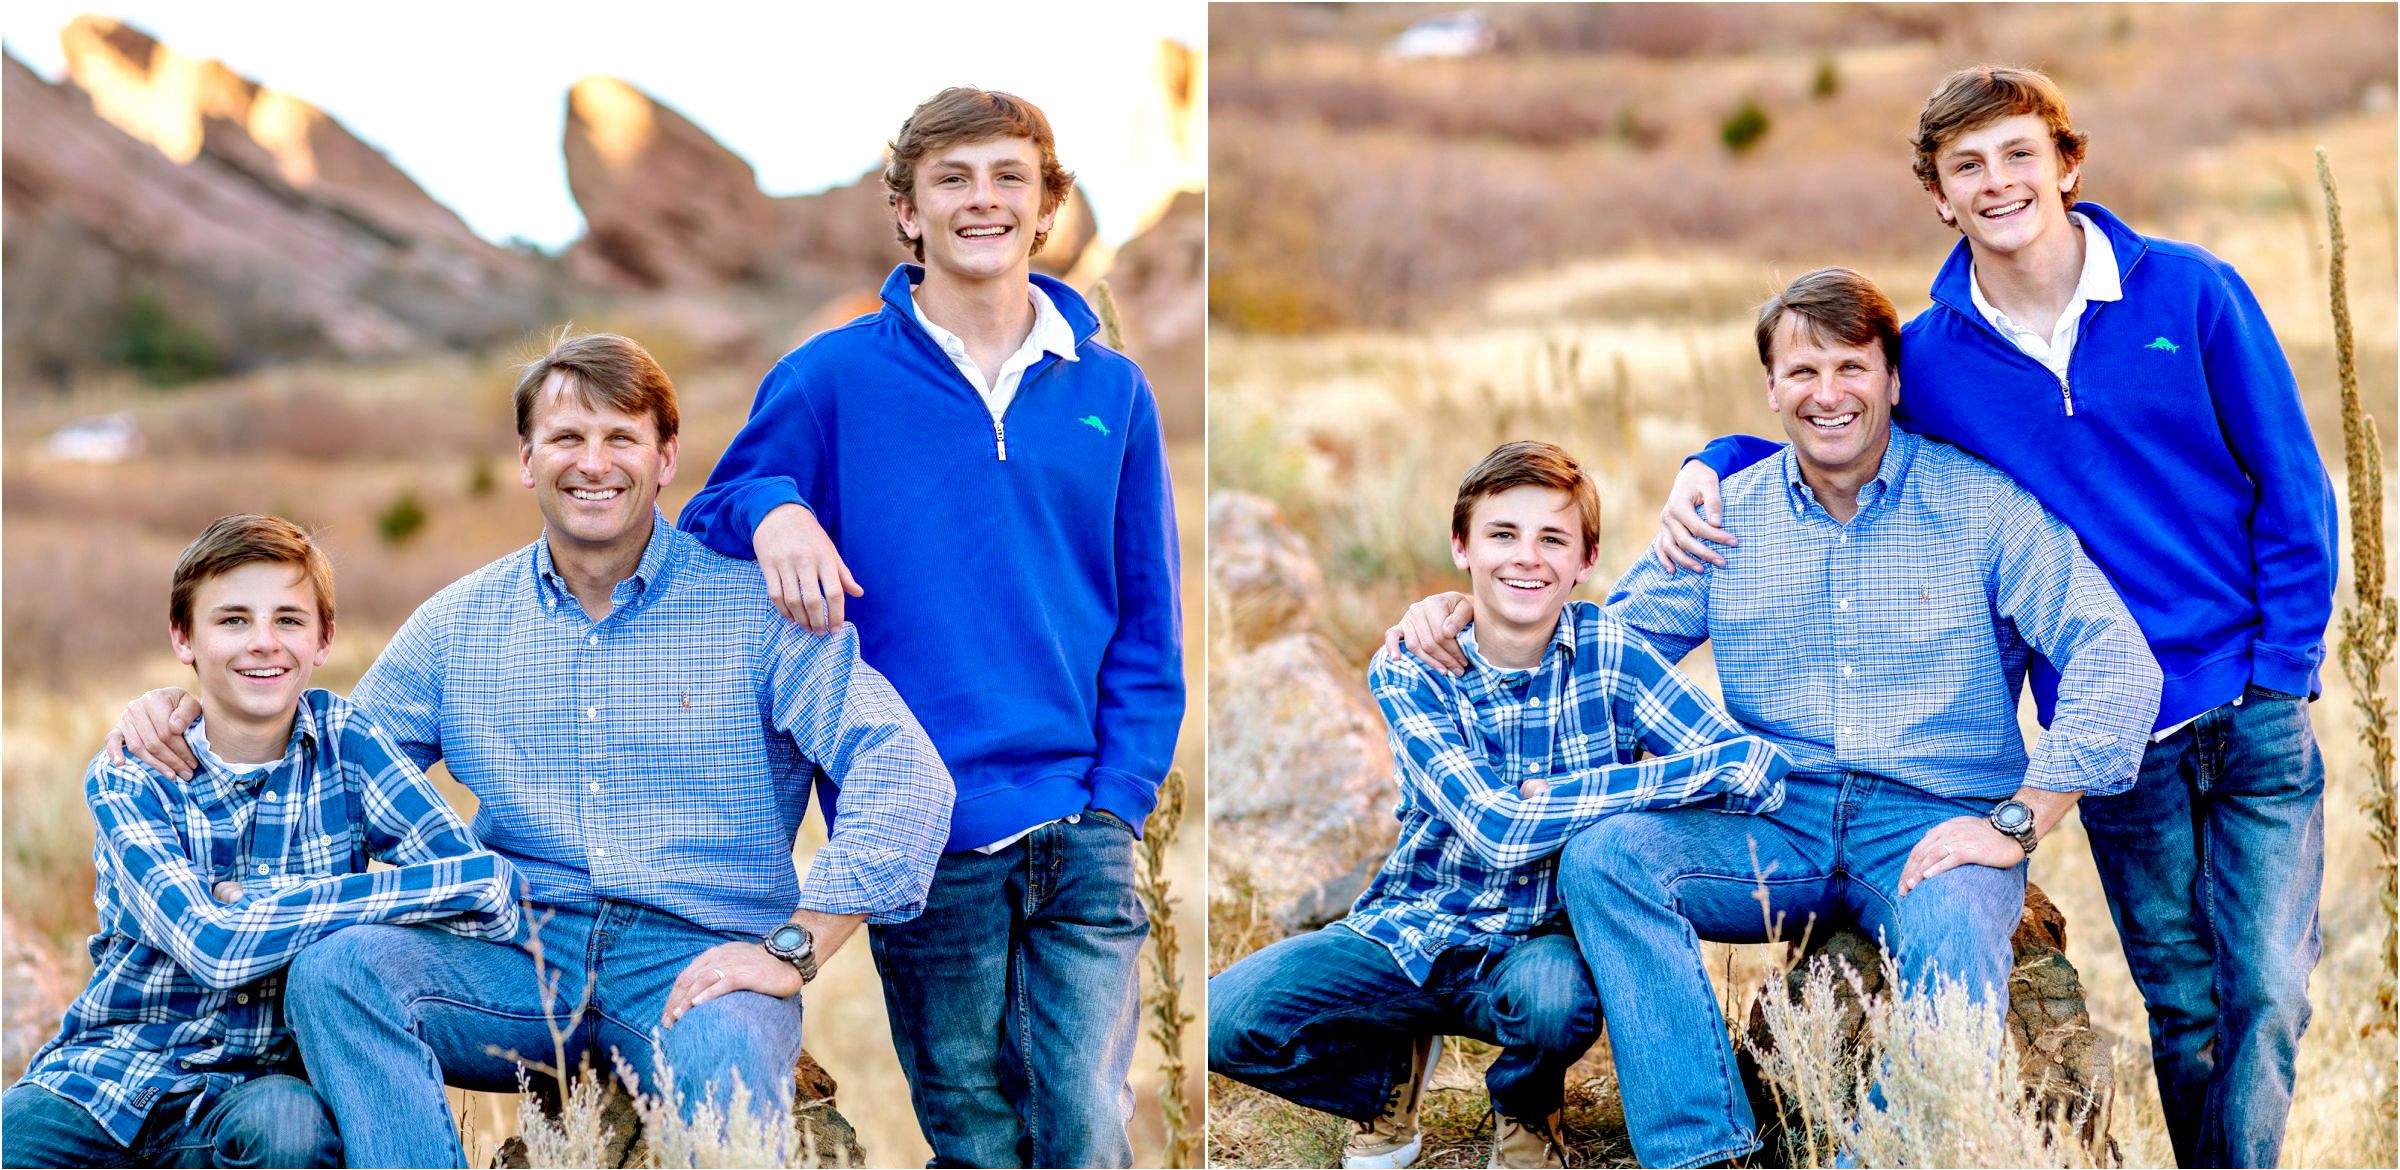 father-son-bonding-during-their-red-rocks-rustic-photo-shoot-004